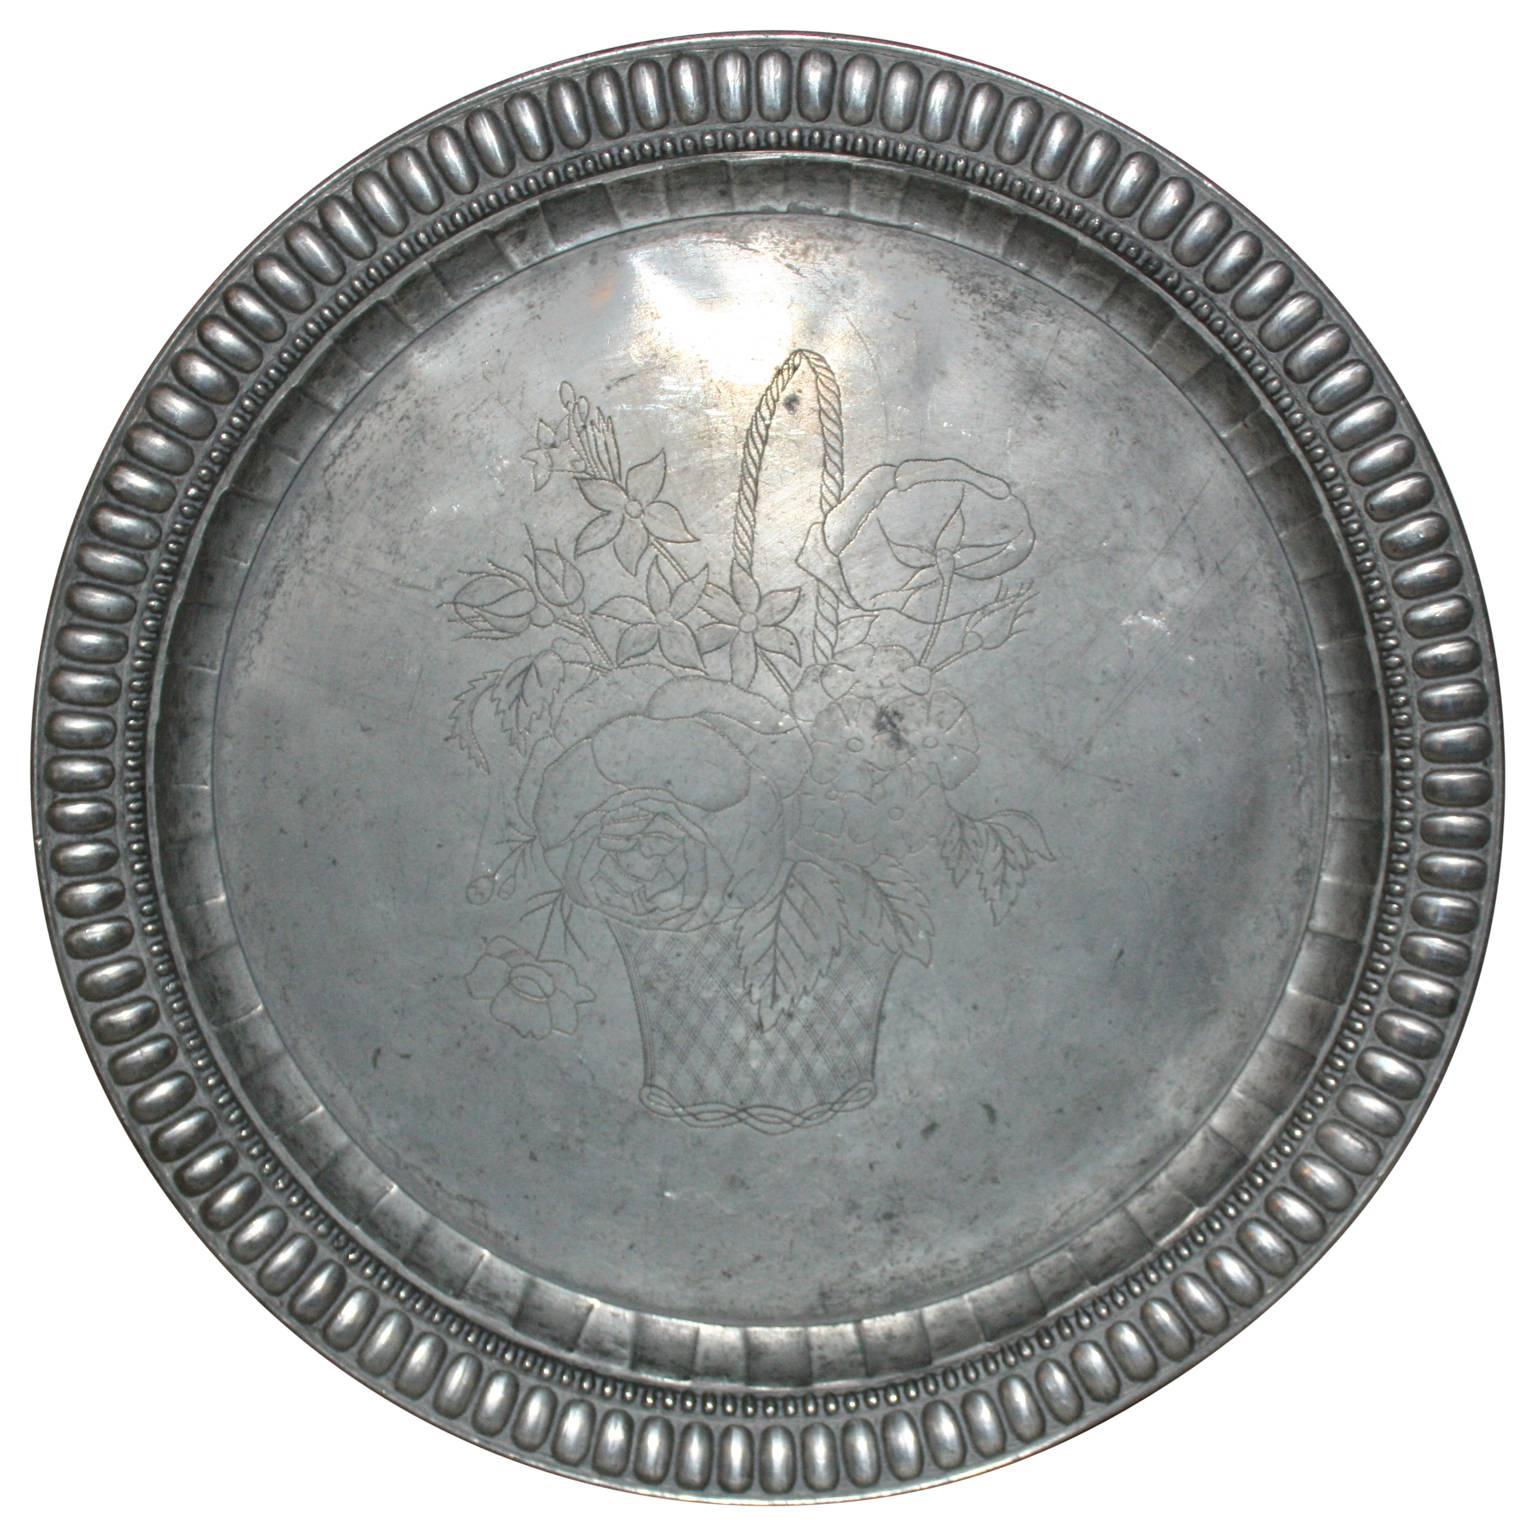 Charming pewter dish with engraved floral motive in the middle and bevelled edge.